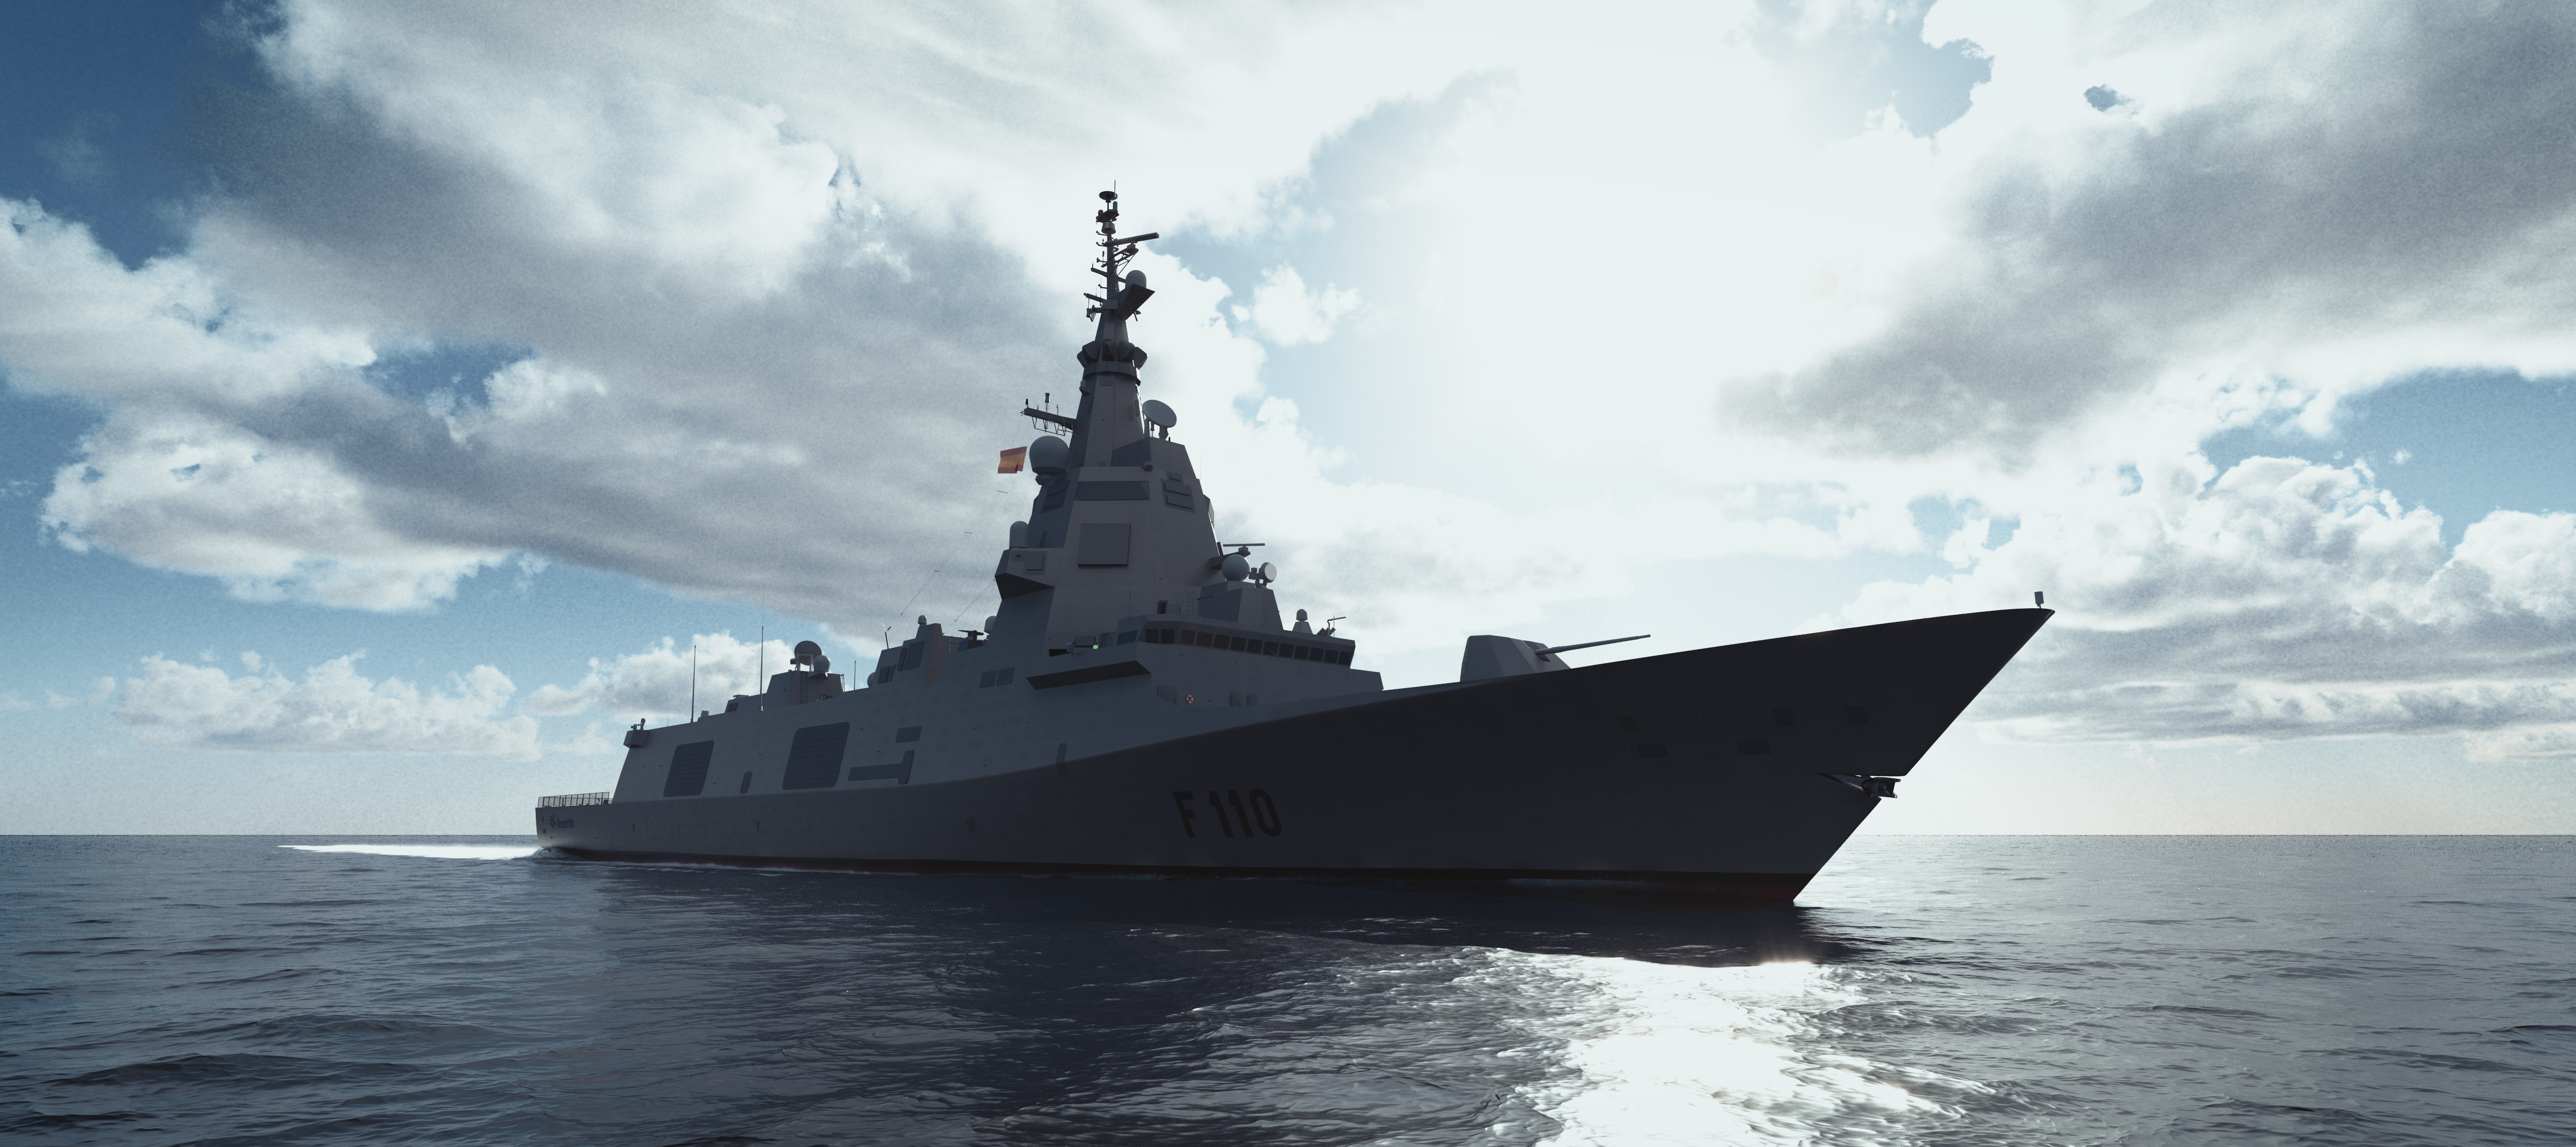 Navantia has started the construction process of the new F-110 class frigate for Spanish Navy